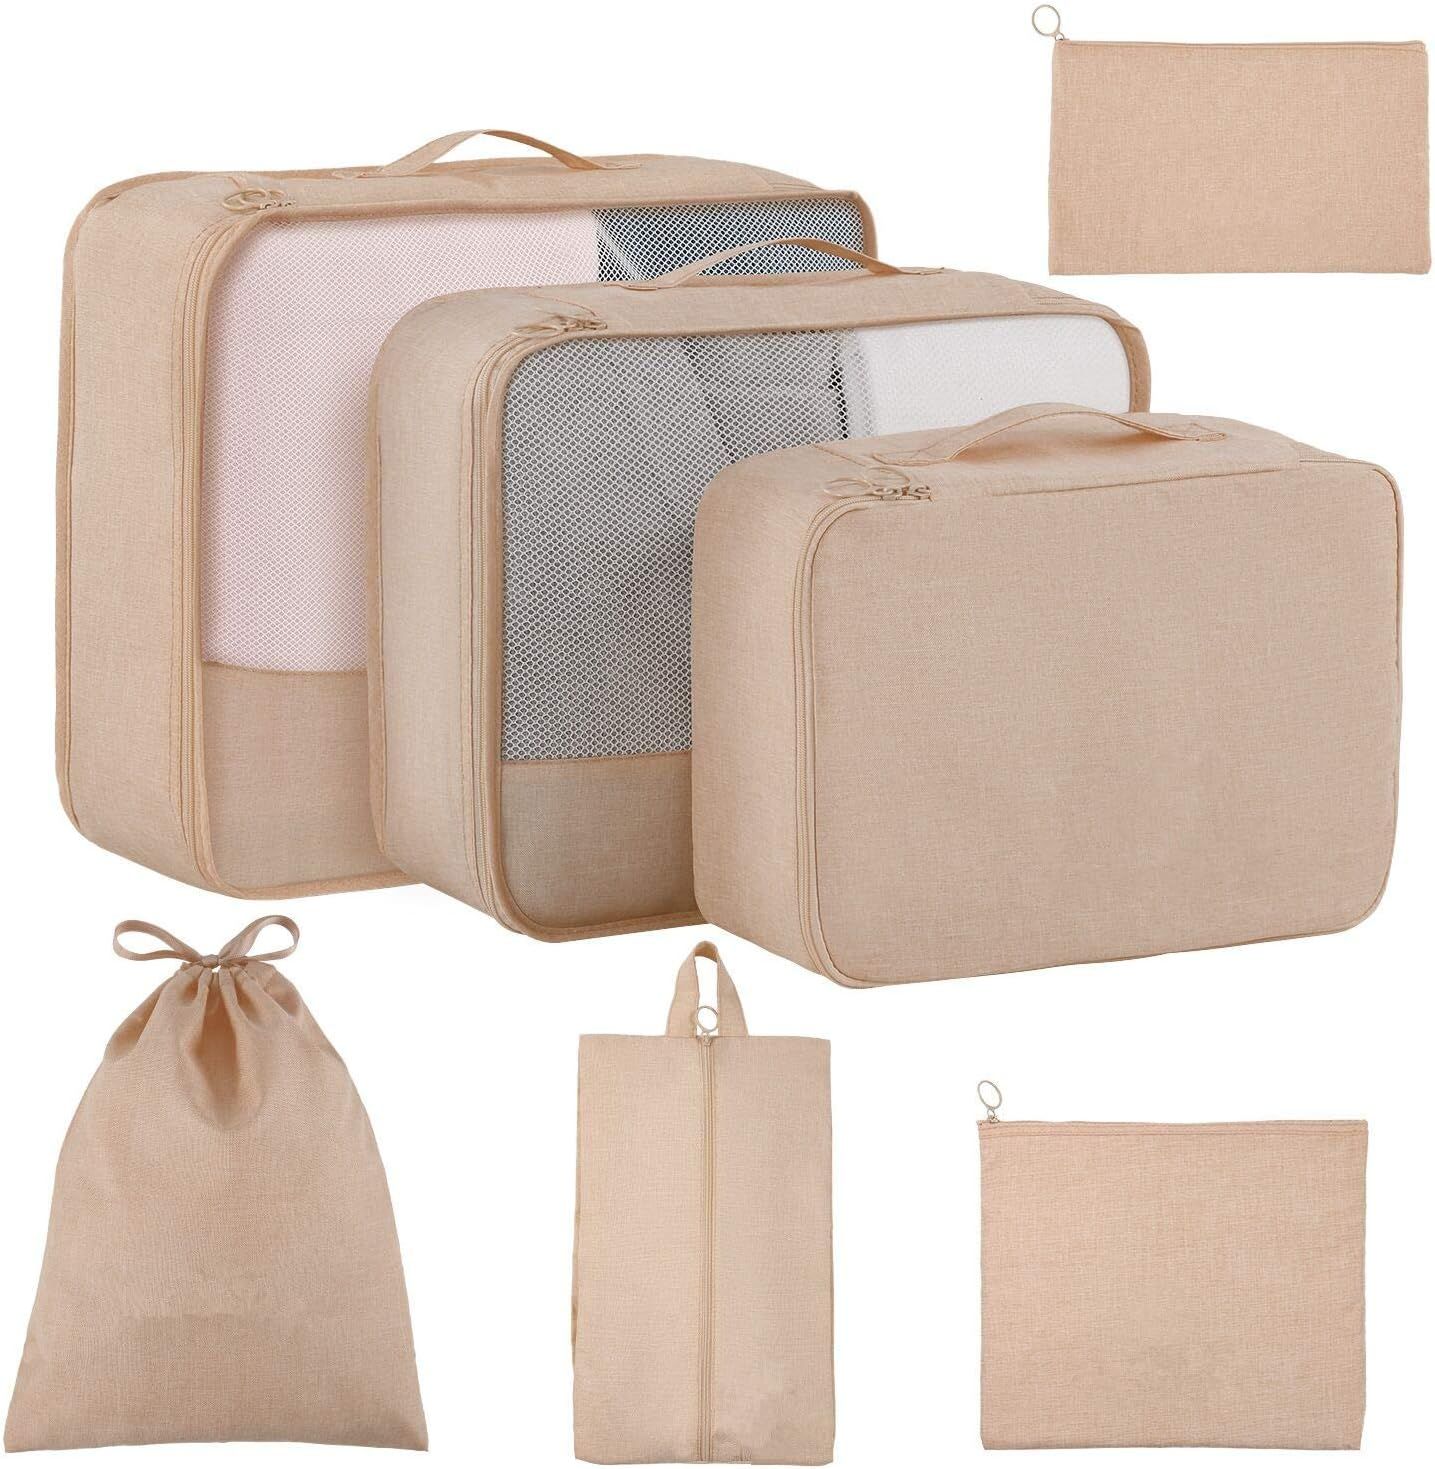 Packing Cubes for Travel 7 Set, Luggage Packing Organizers with Shoe Bag and Toiletry Bag (Beige) | Amazon (US)